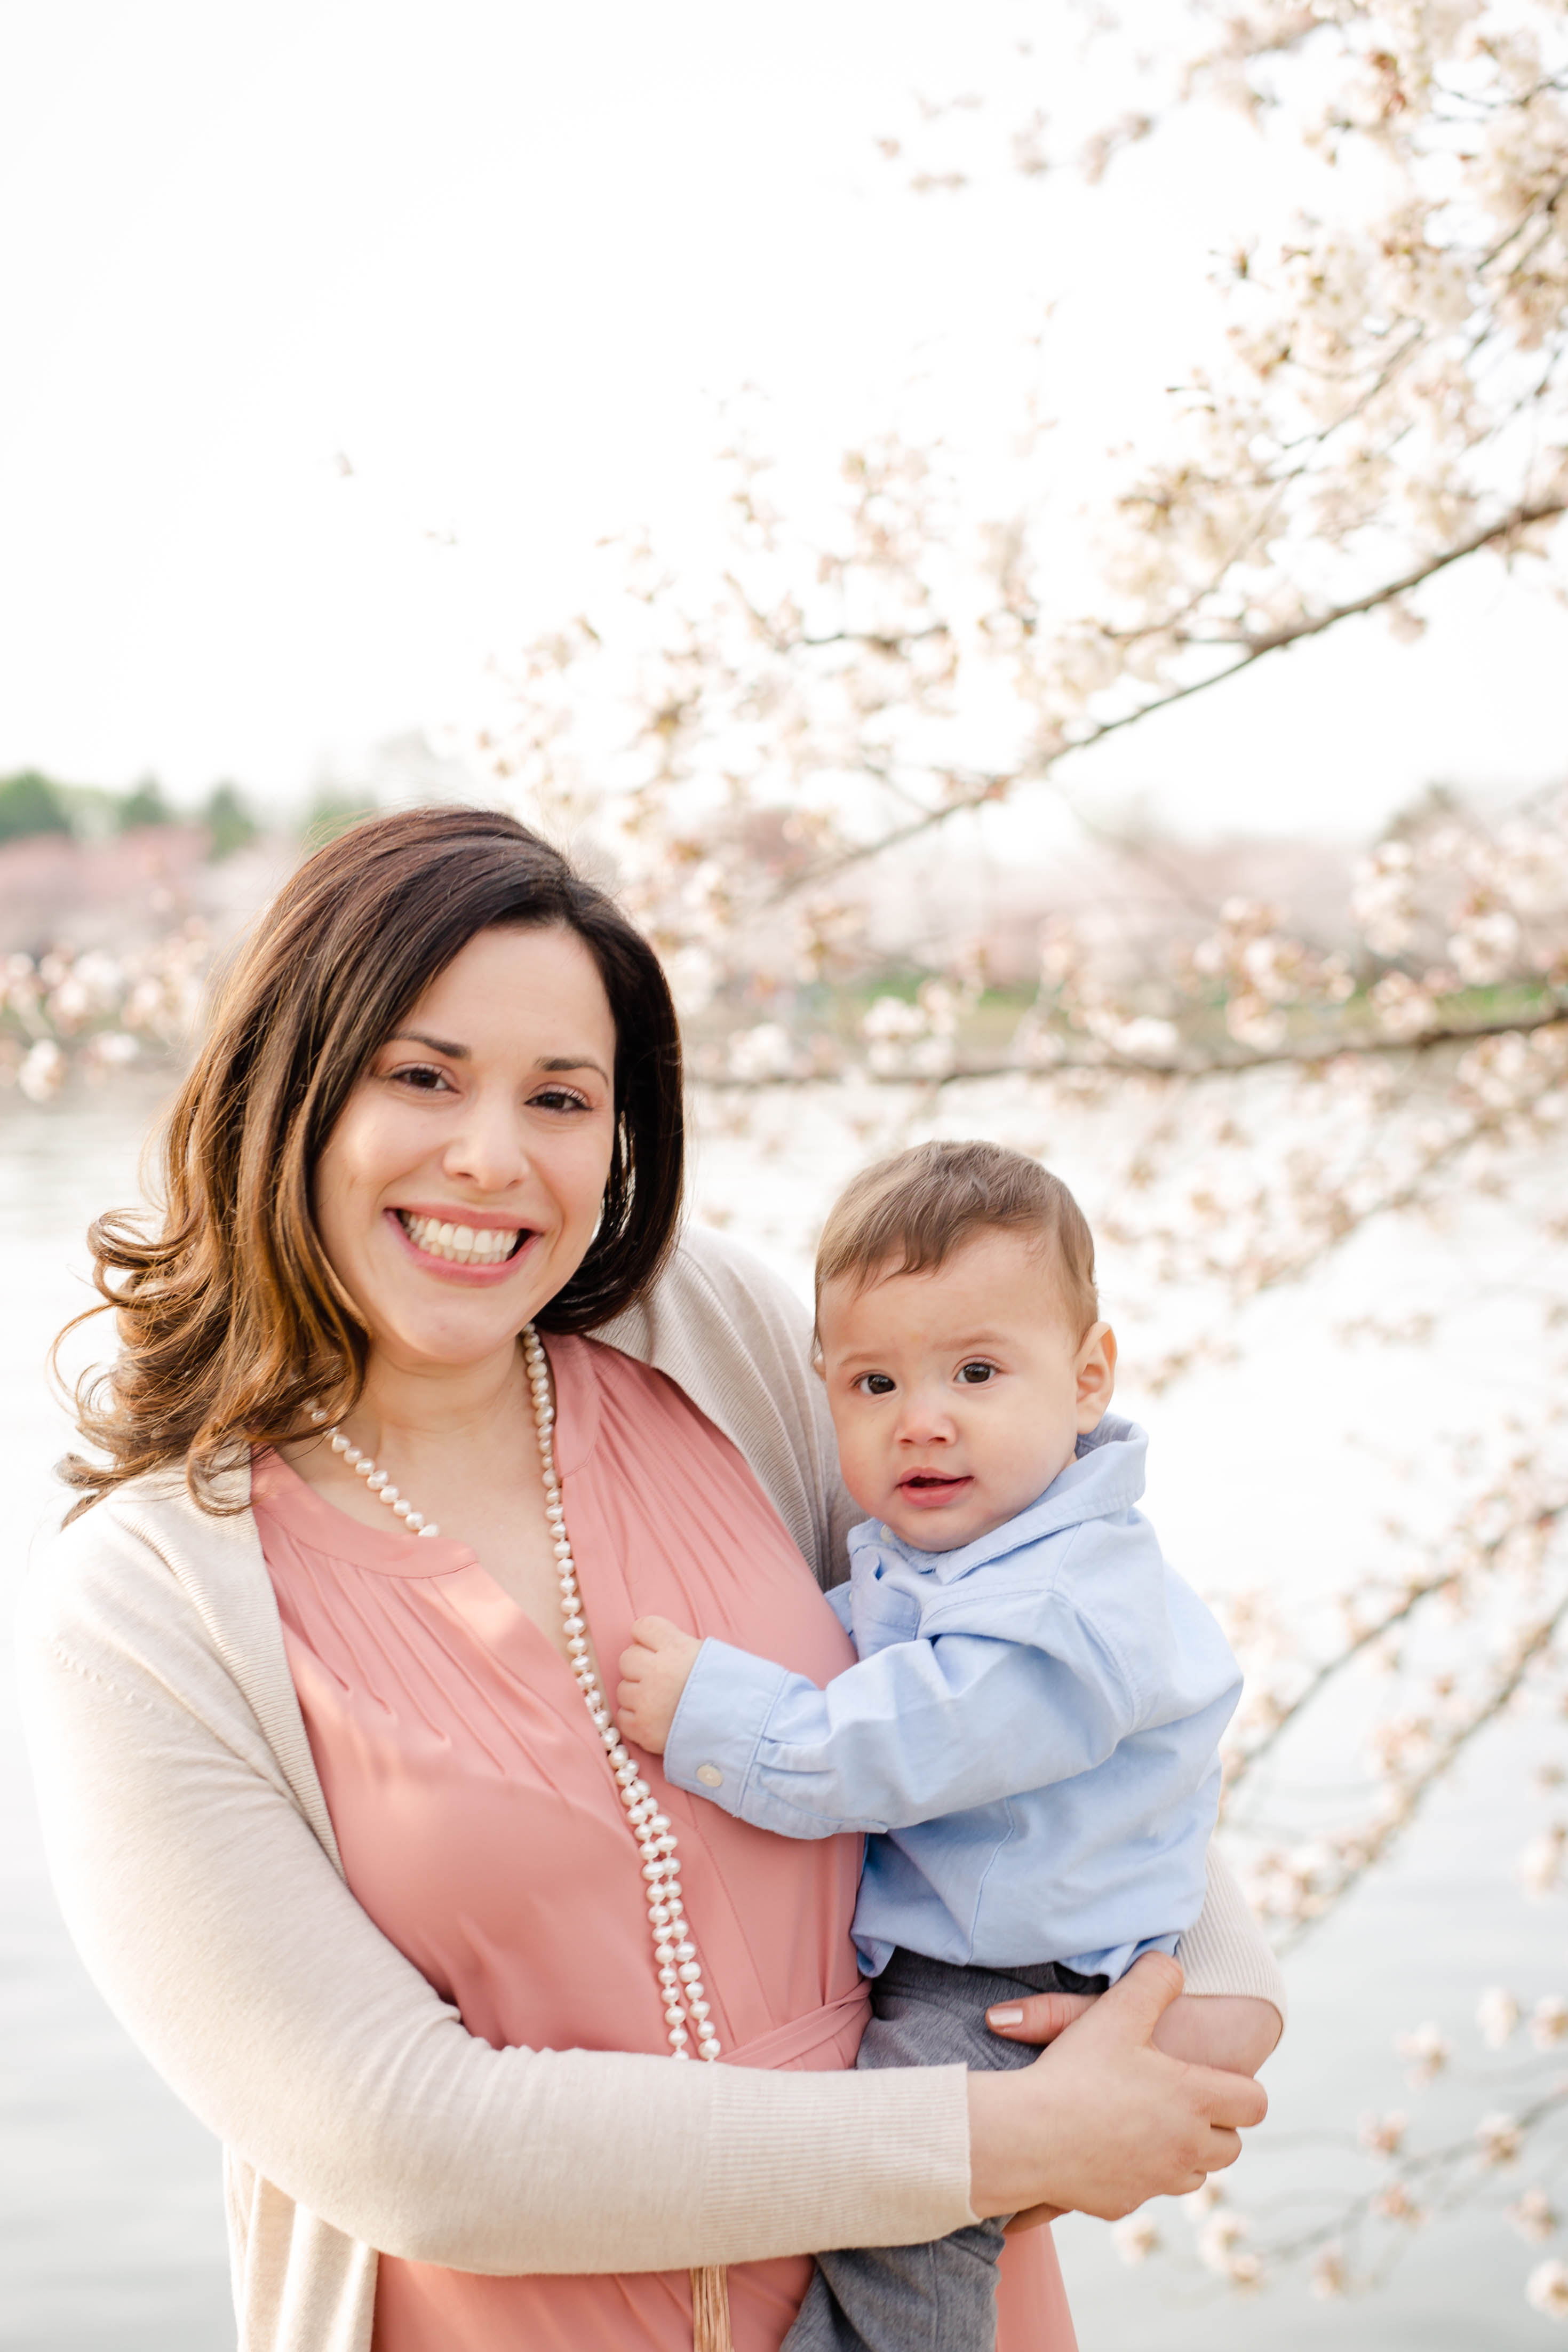 Family Photos - The Wintters at Cherry Blossoms | Rachel E.H. Photography